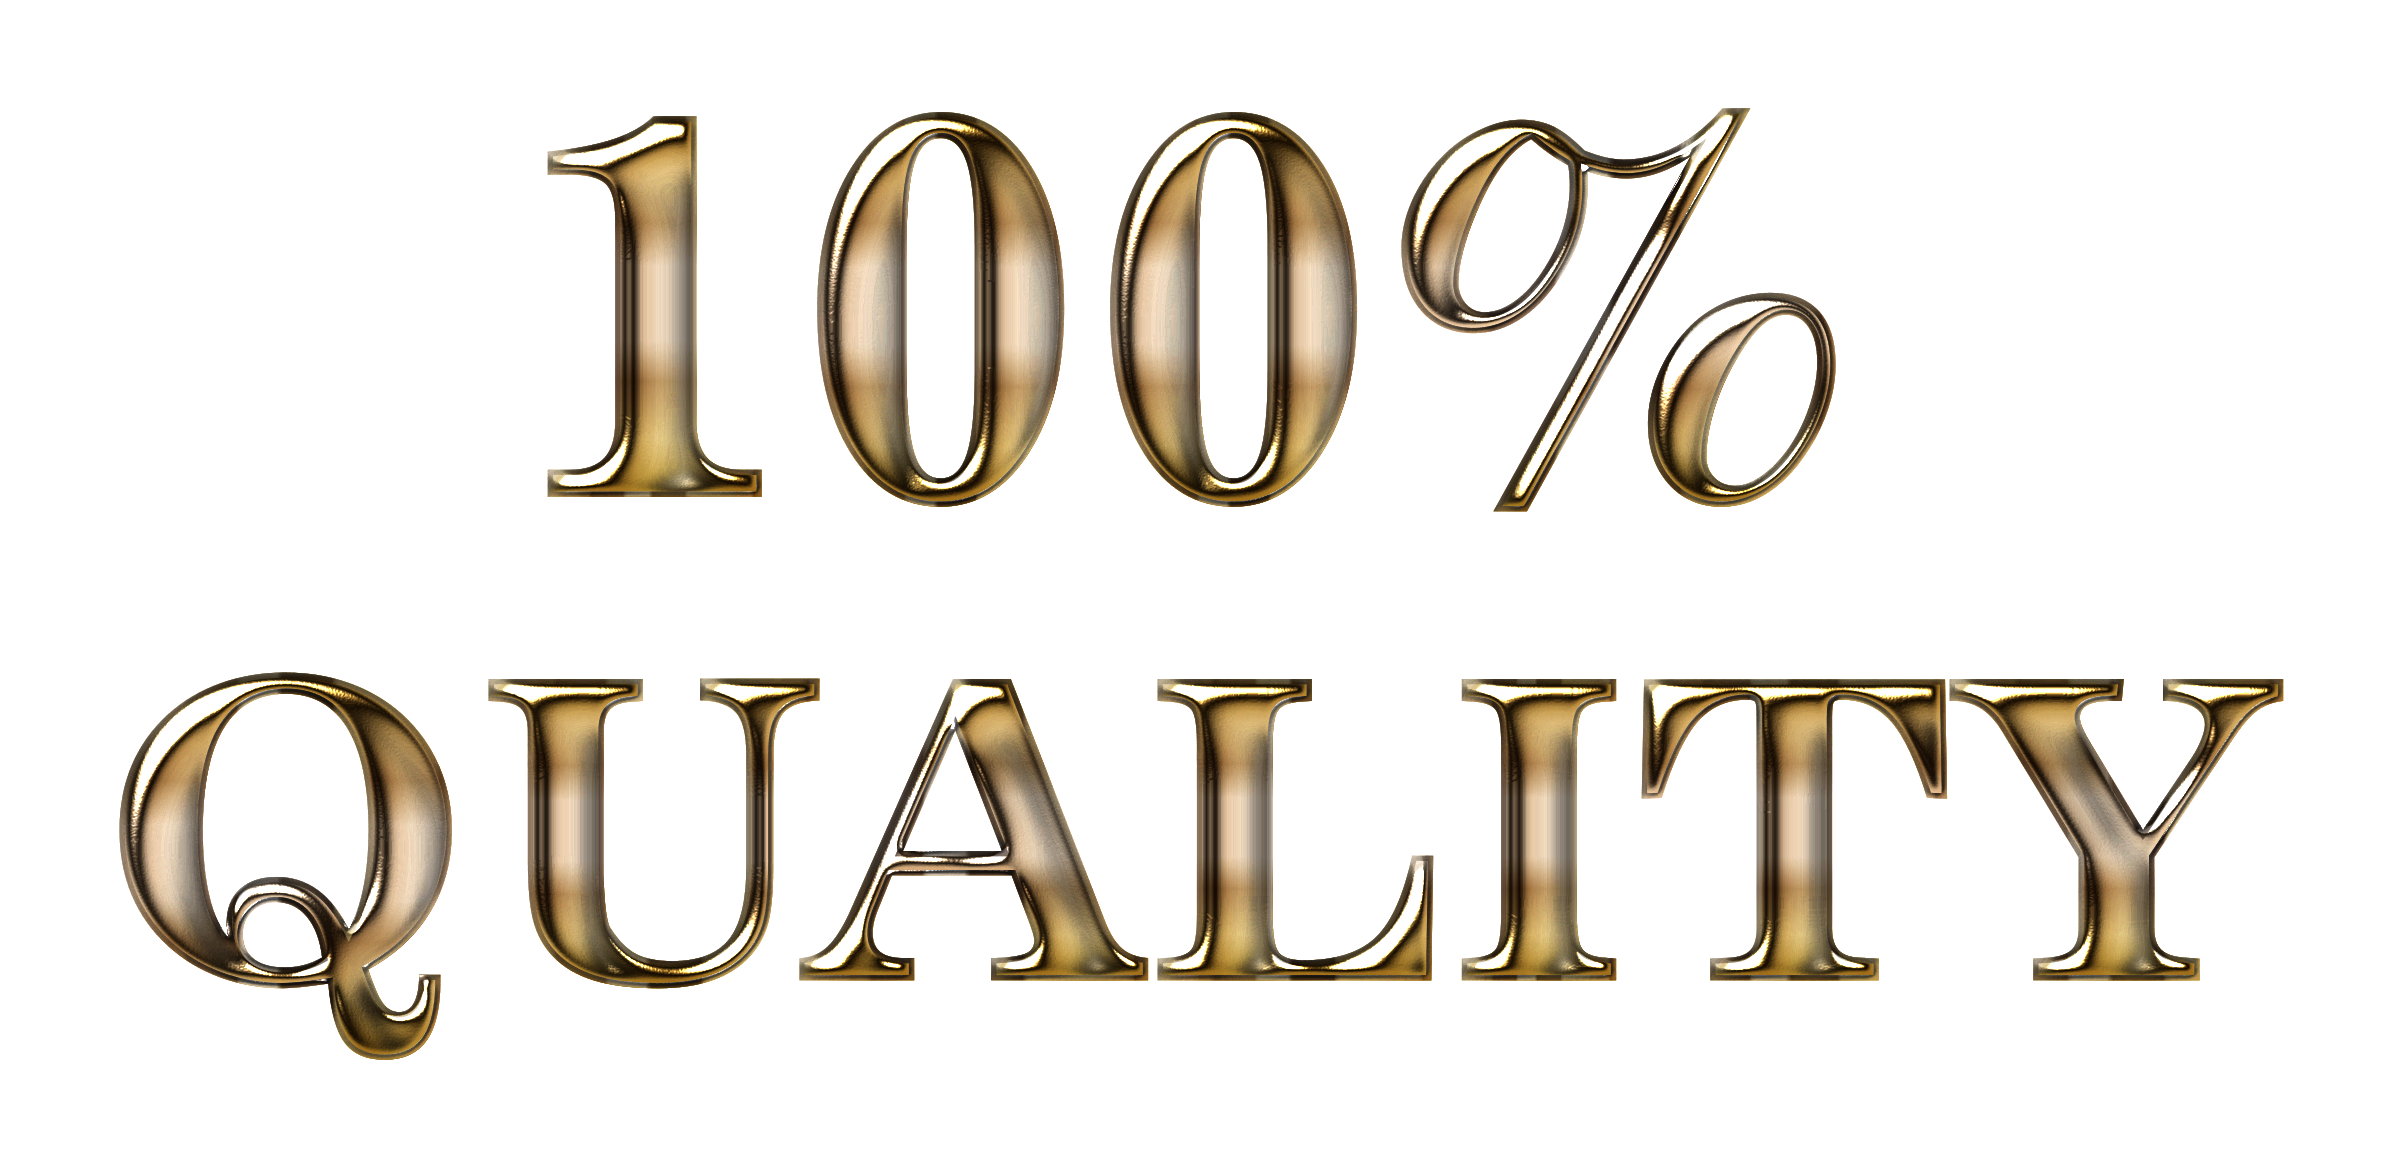 clipart quality - photo #39